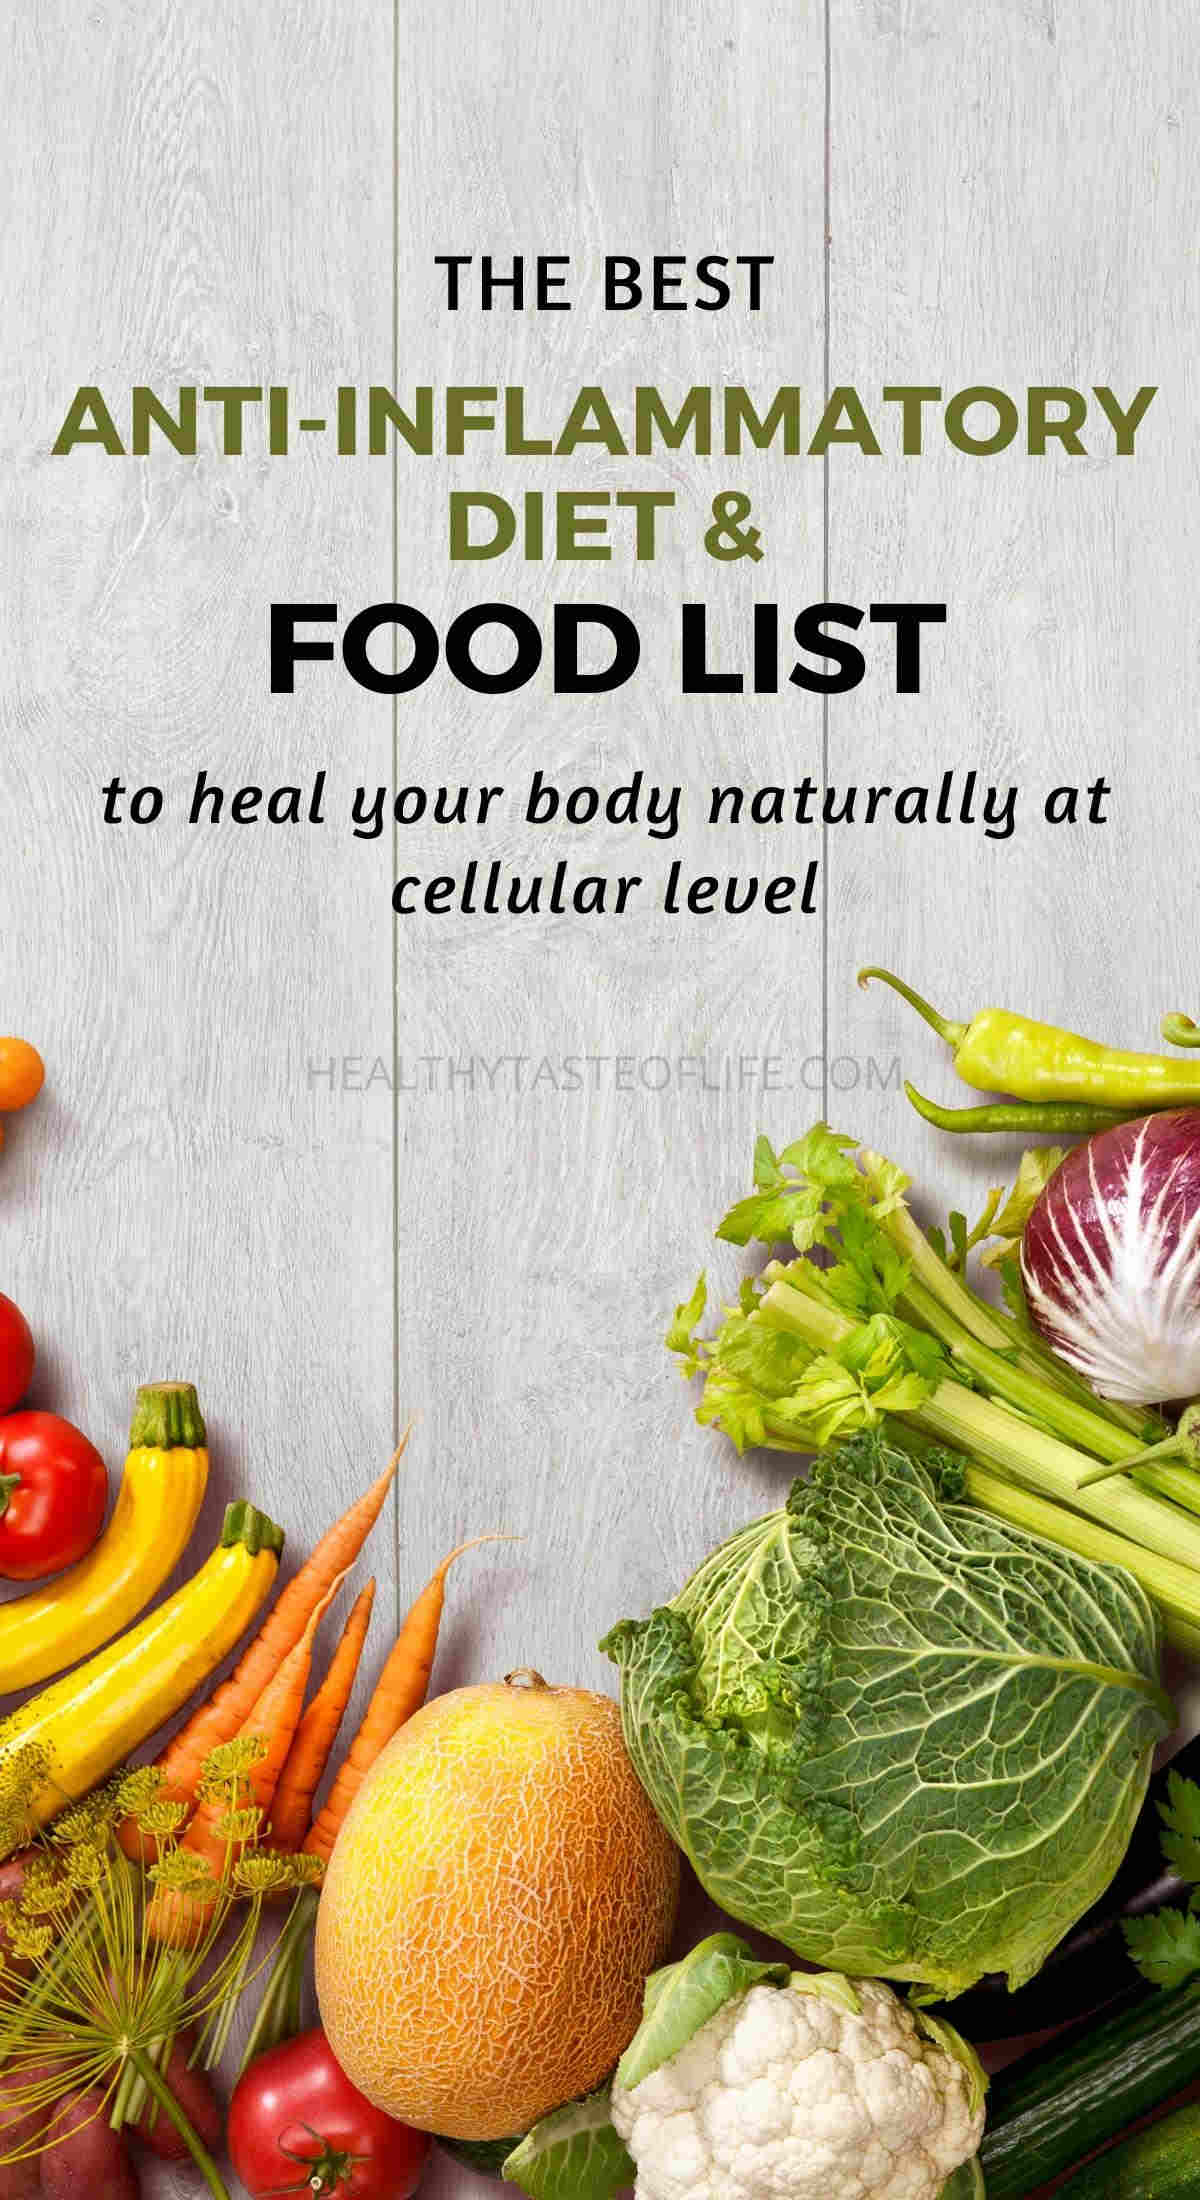 Anti-inflammatory food choices that can help reduce chronic inflammation and improve our immune system. Explore what healing on cellular level means and the benefits of certain foods for healing. Plus tips that will help you to choose the best anti-inflammatory food list - PDF and inflammatory foods to avoid. #antiinflammationfoods #antiinflammationdiet #antiinflammatoryfoodlist #healingfoods #guthealingfoods #guthealingdiet
